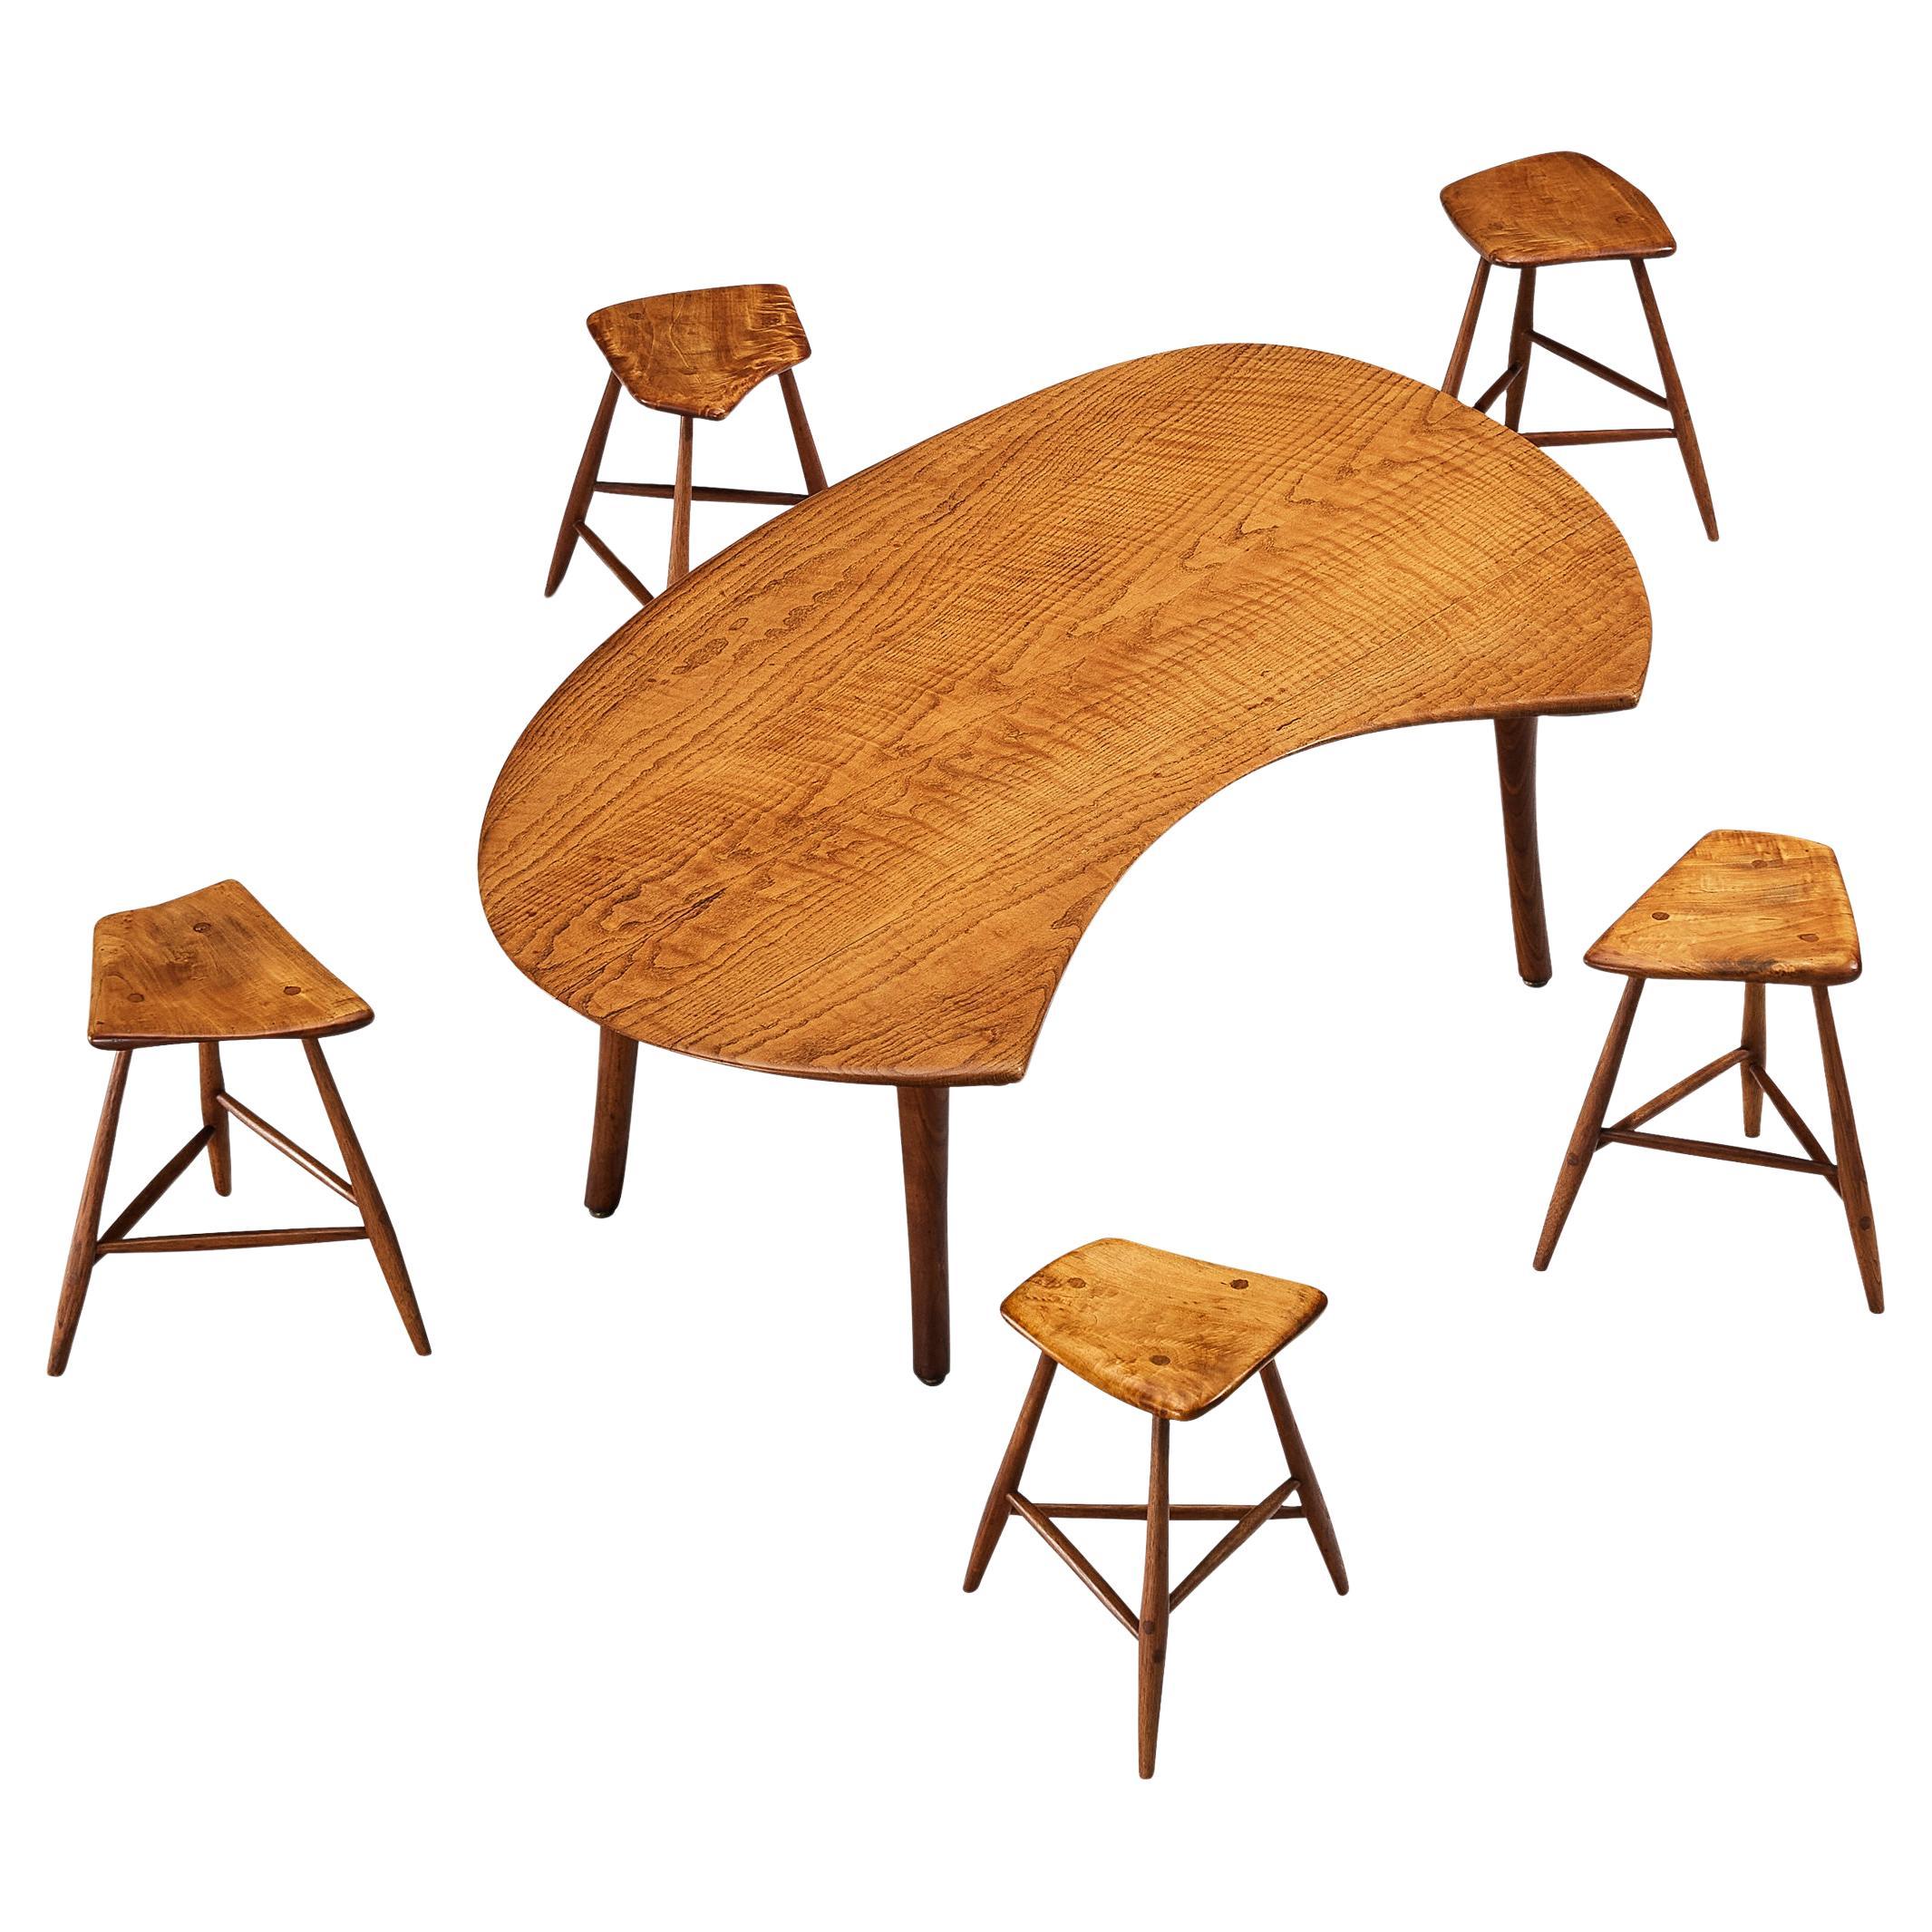 Wharton Esherick Coffee Table and Stools in Cottonwood and Ash  For Sale